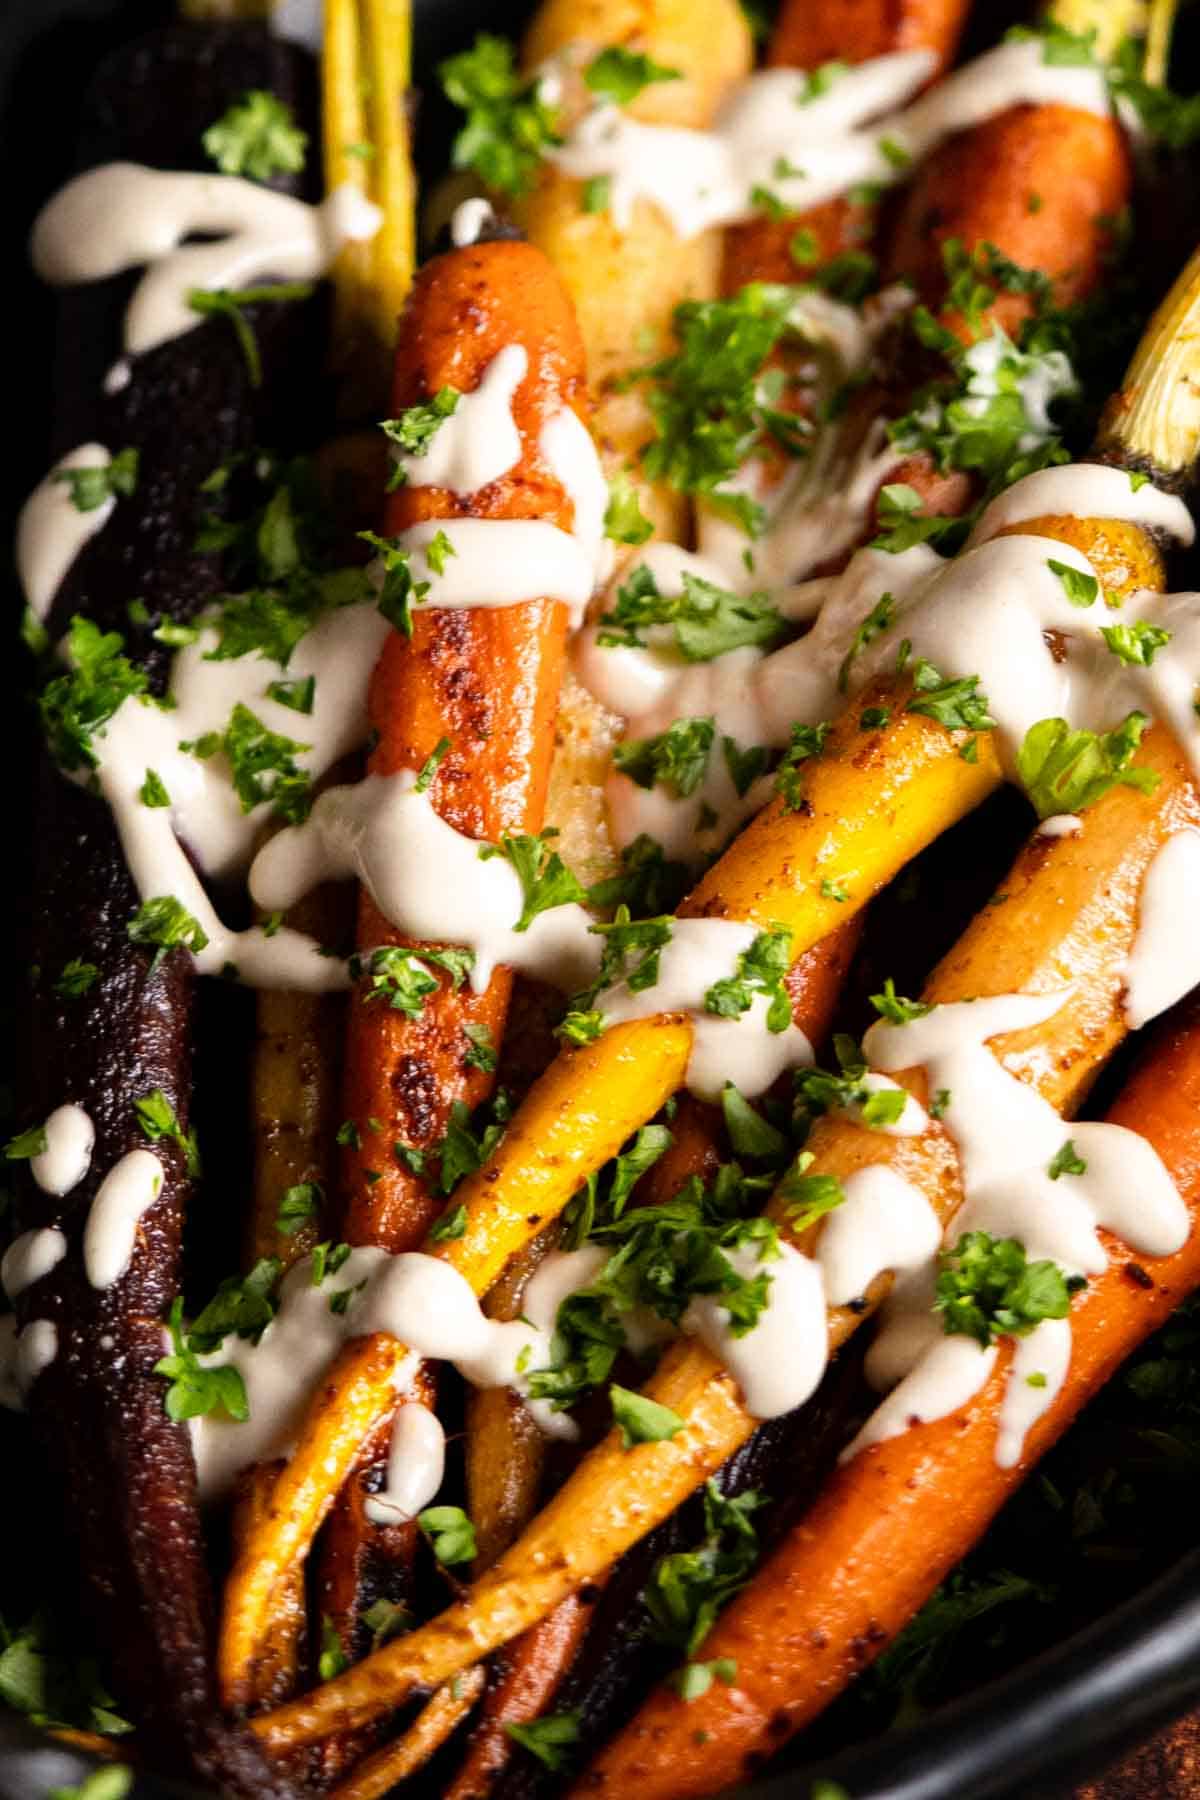 Roasted rainbow carrots with tahini and greens.